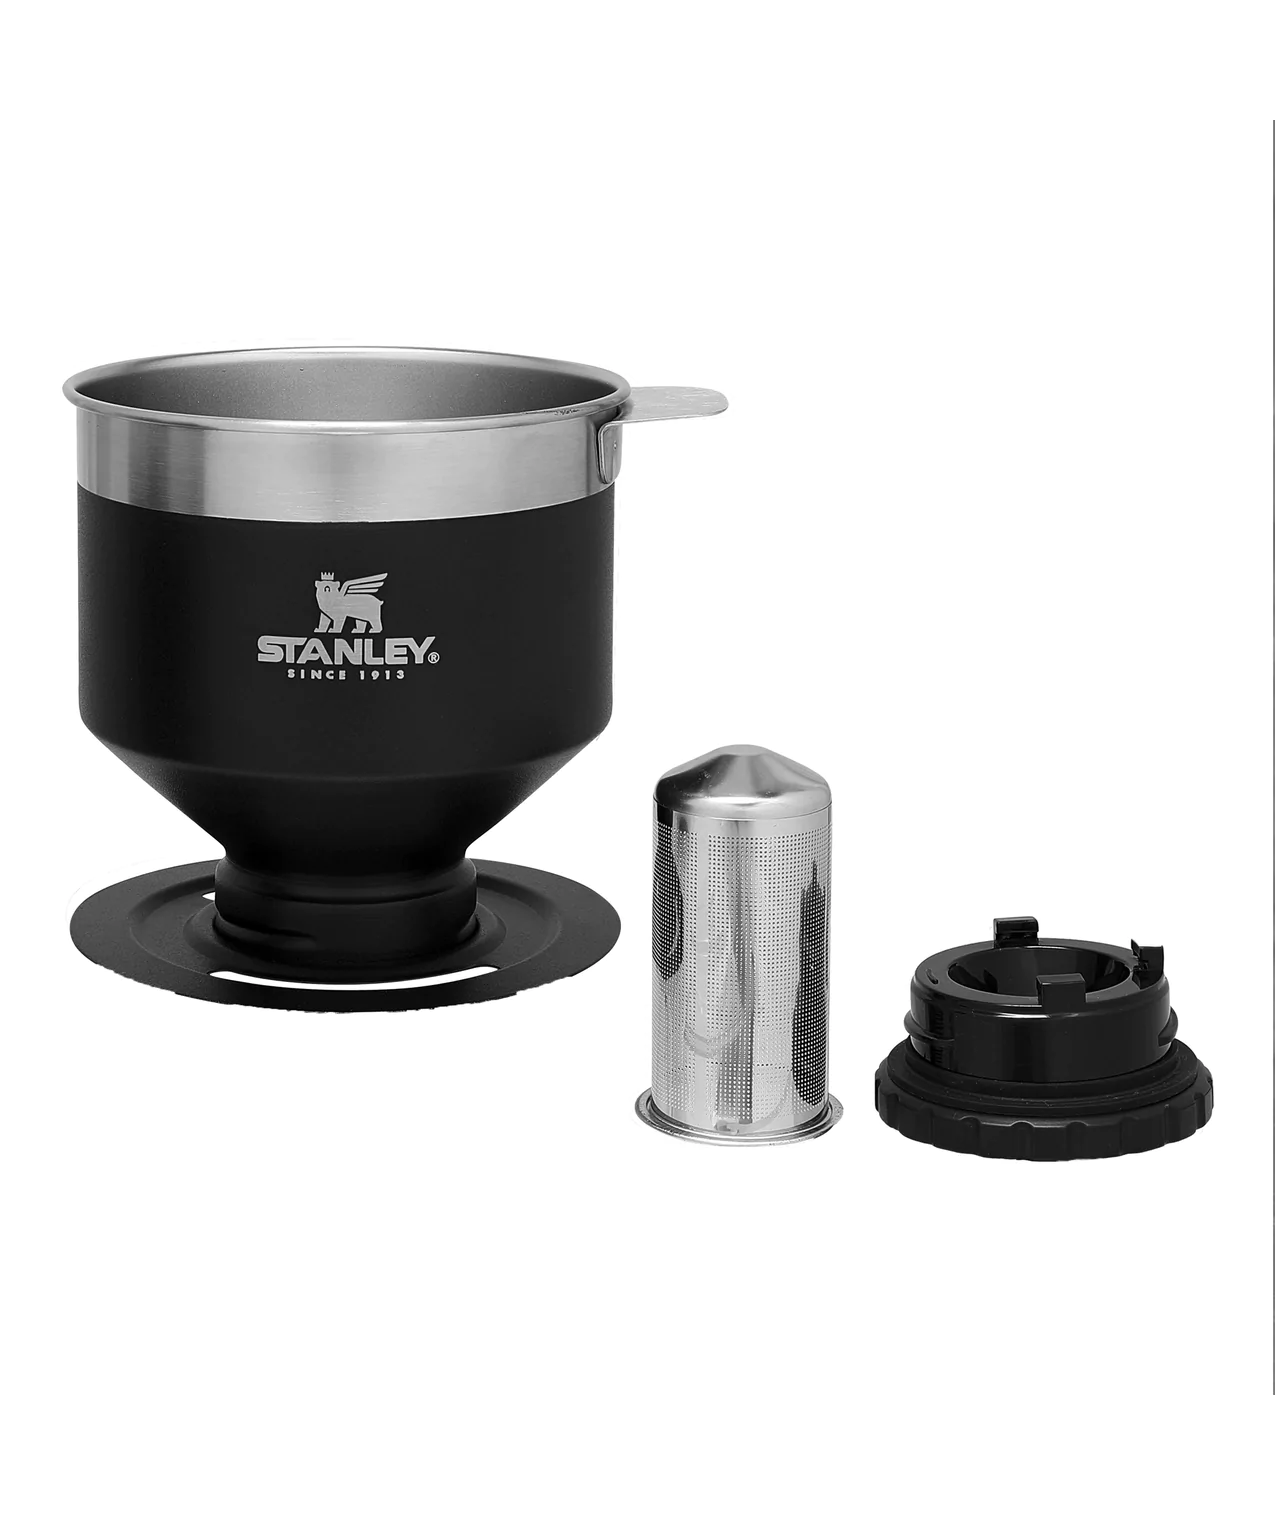 Stanley The Perfect-Brew Pour Over coffee filter - Hammertone Green